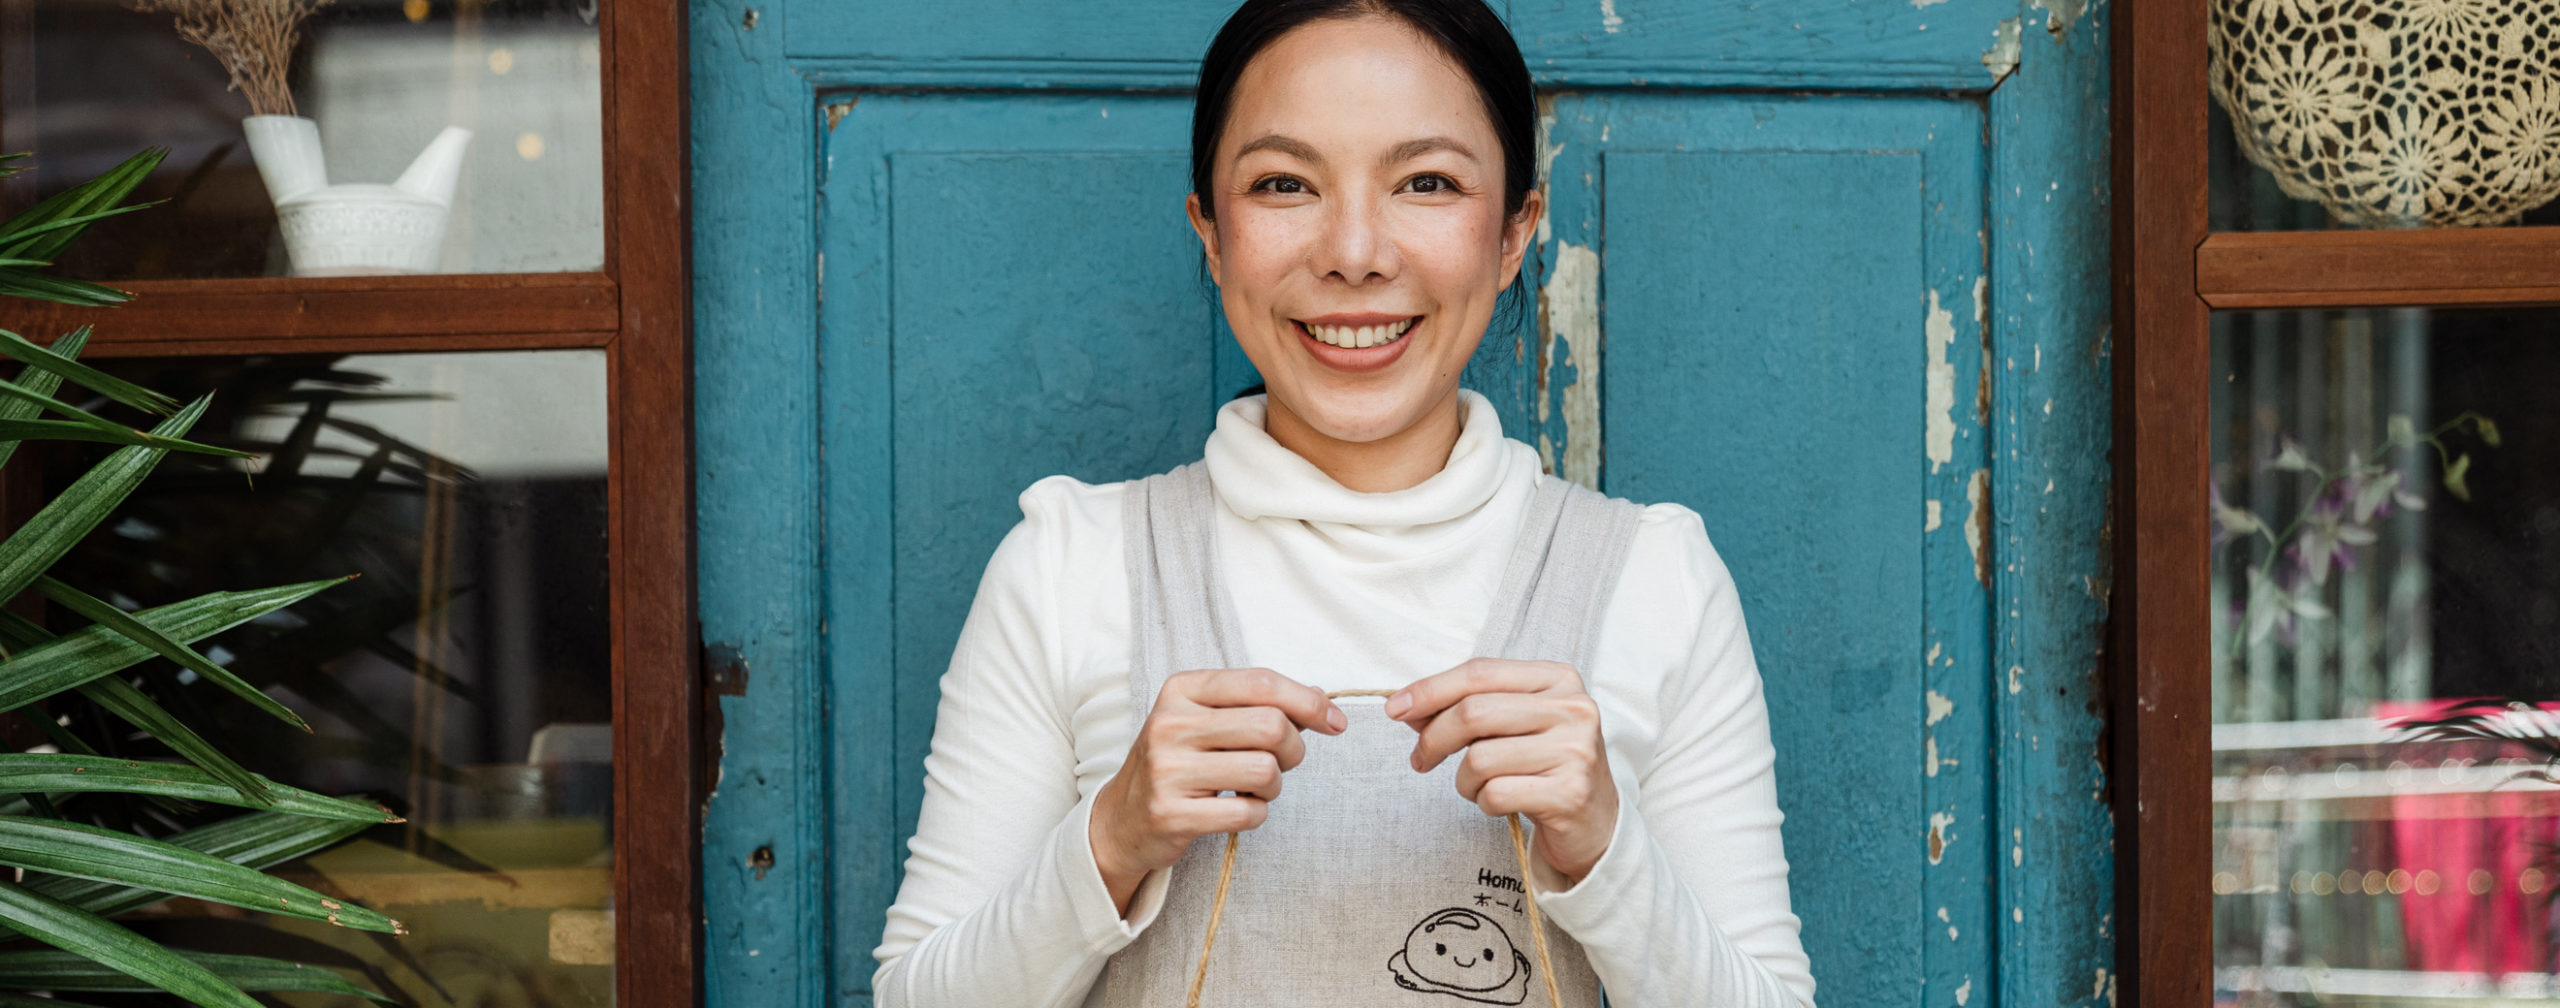 A woman with dark hair, a white turtleneck, and a gray apron smiles while standing in front of a turquoise door. 						